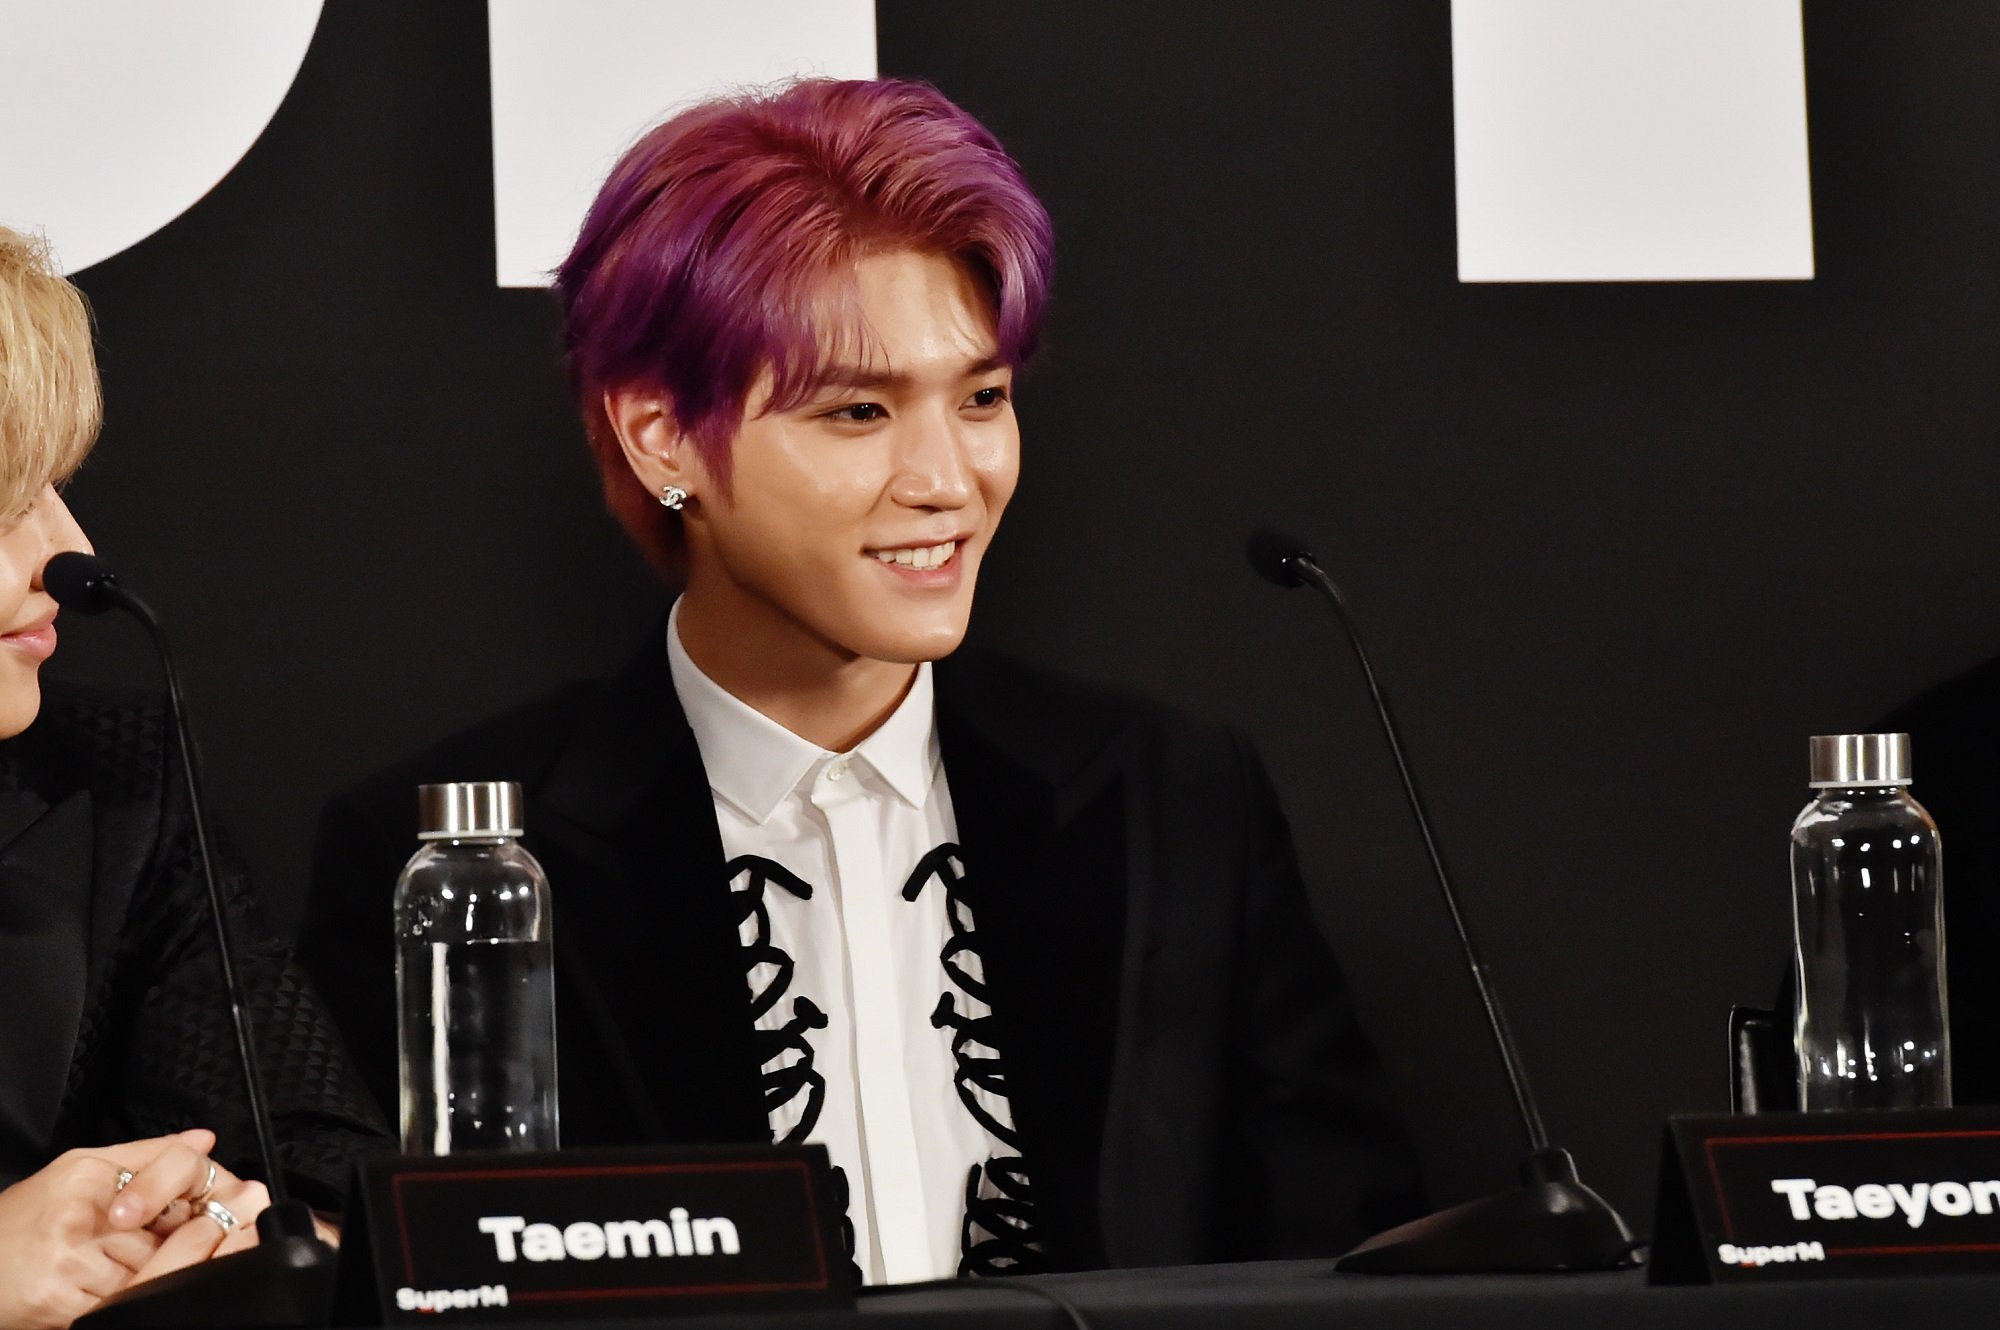 Taeyong during the SuperM Premiere Event Live From Capitol Records in 2019